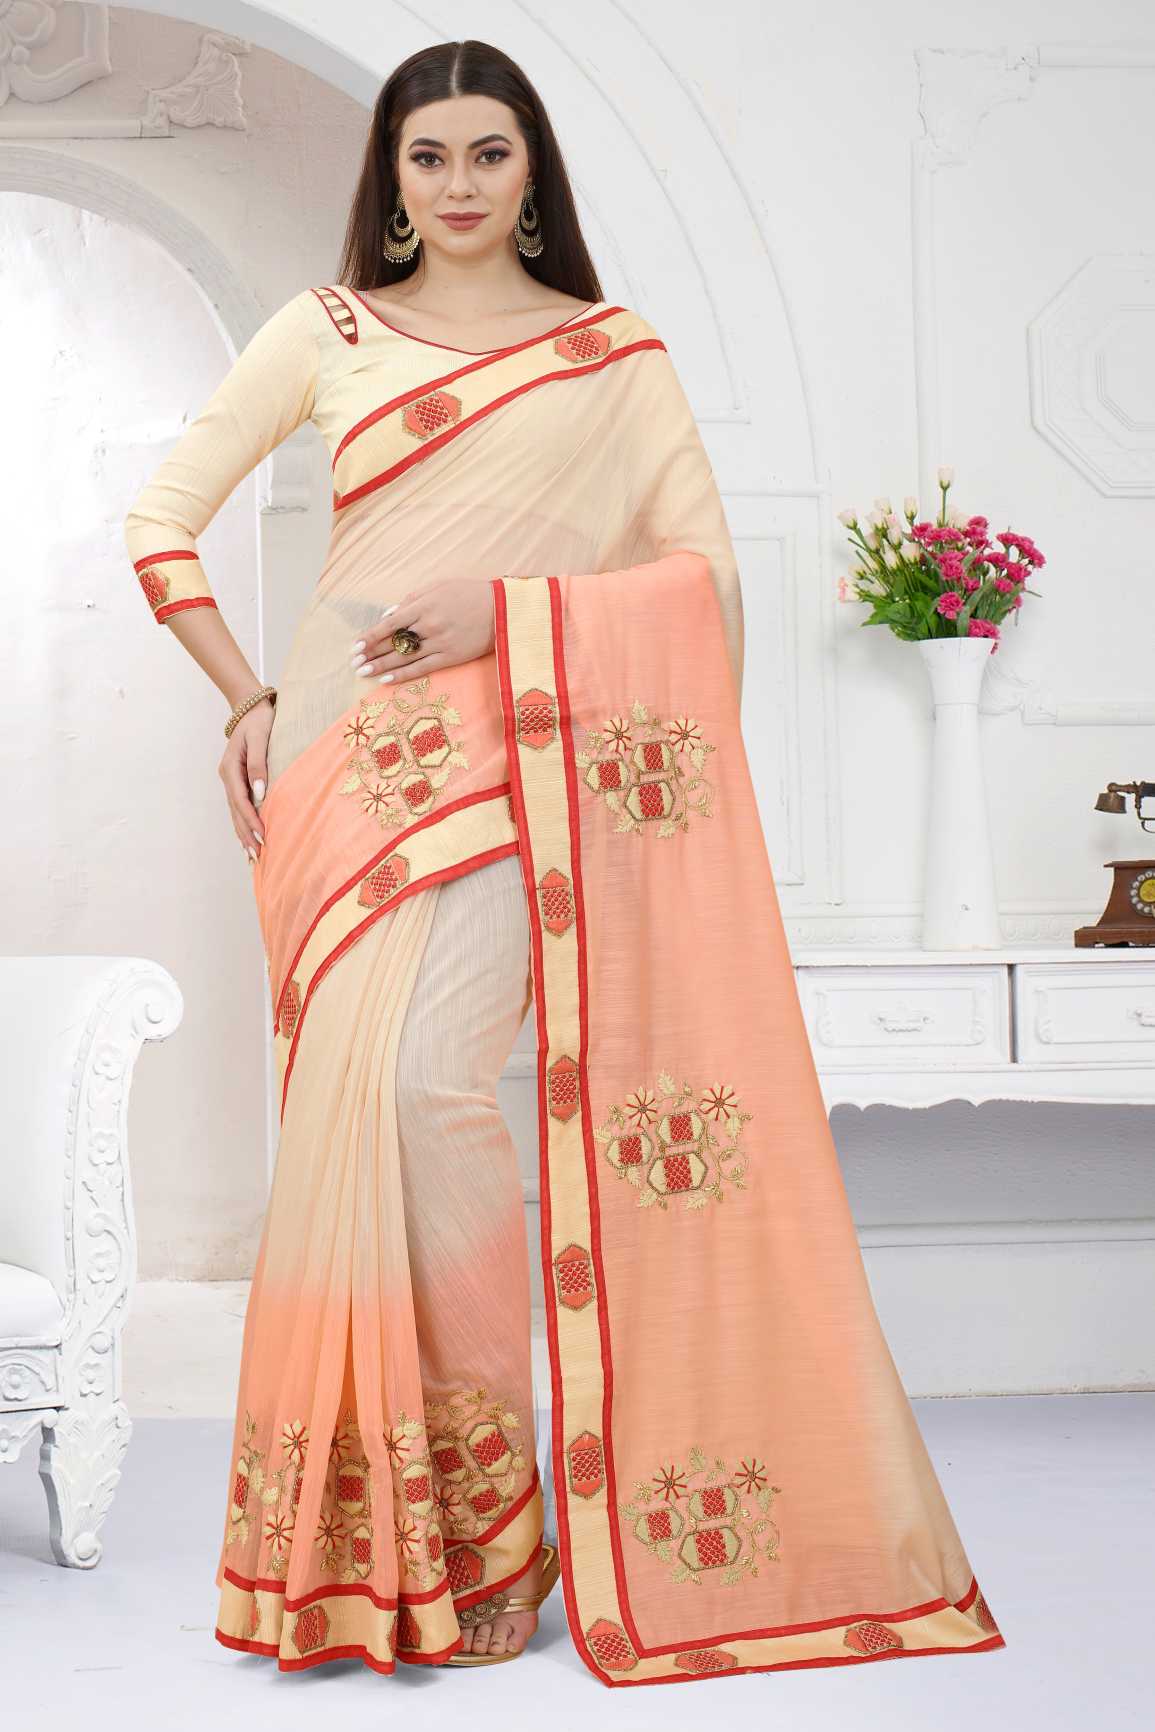 New) Latest Saree Designs 2021 Party Wear Rs.1970